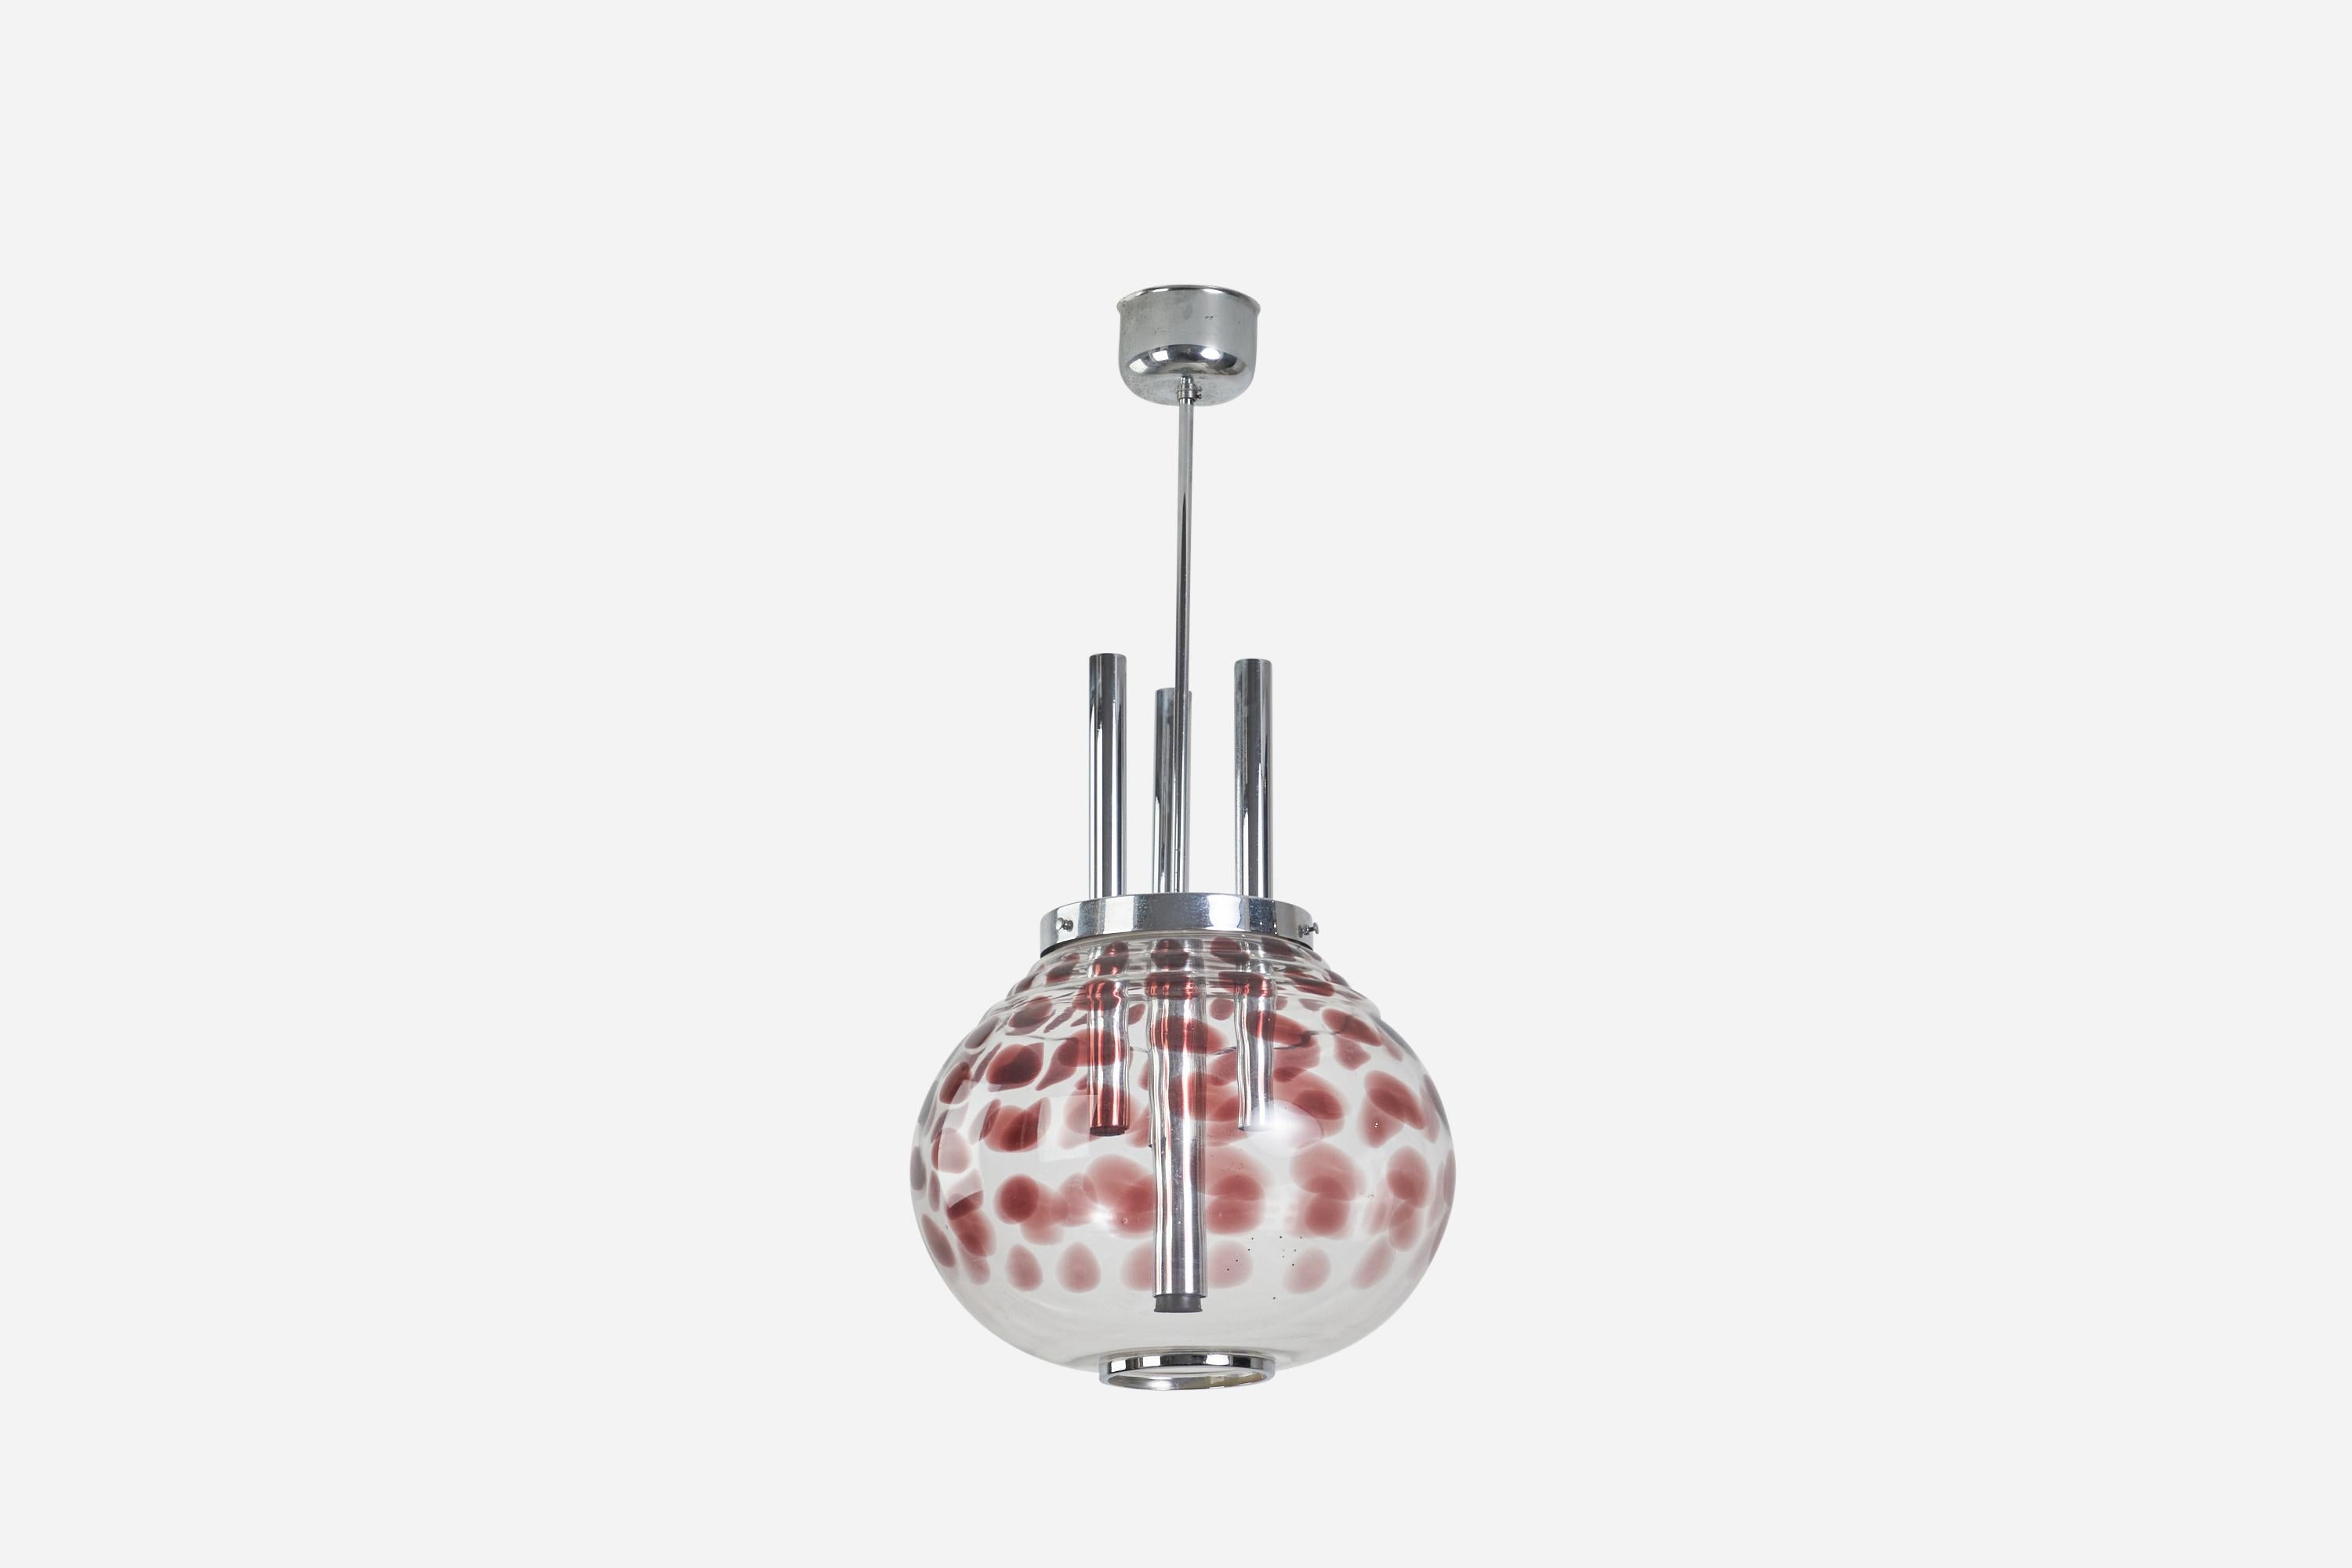 A glass and chrome metal pendant light designed and produced in Italy, 1950s. 

Sockets take standard E-26 medium base and E-14 bulbs. 

There is no maximum wattage stated on the fixture.

Dimensions of canopy (inches) : 2.95 x 4.81 x 4.81